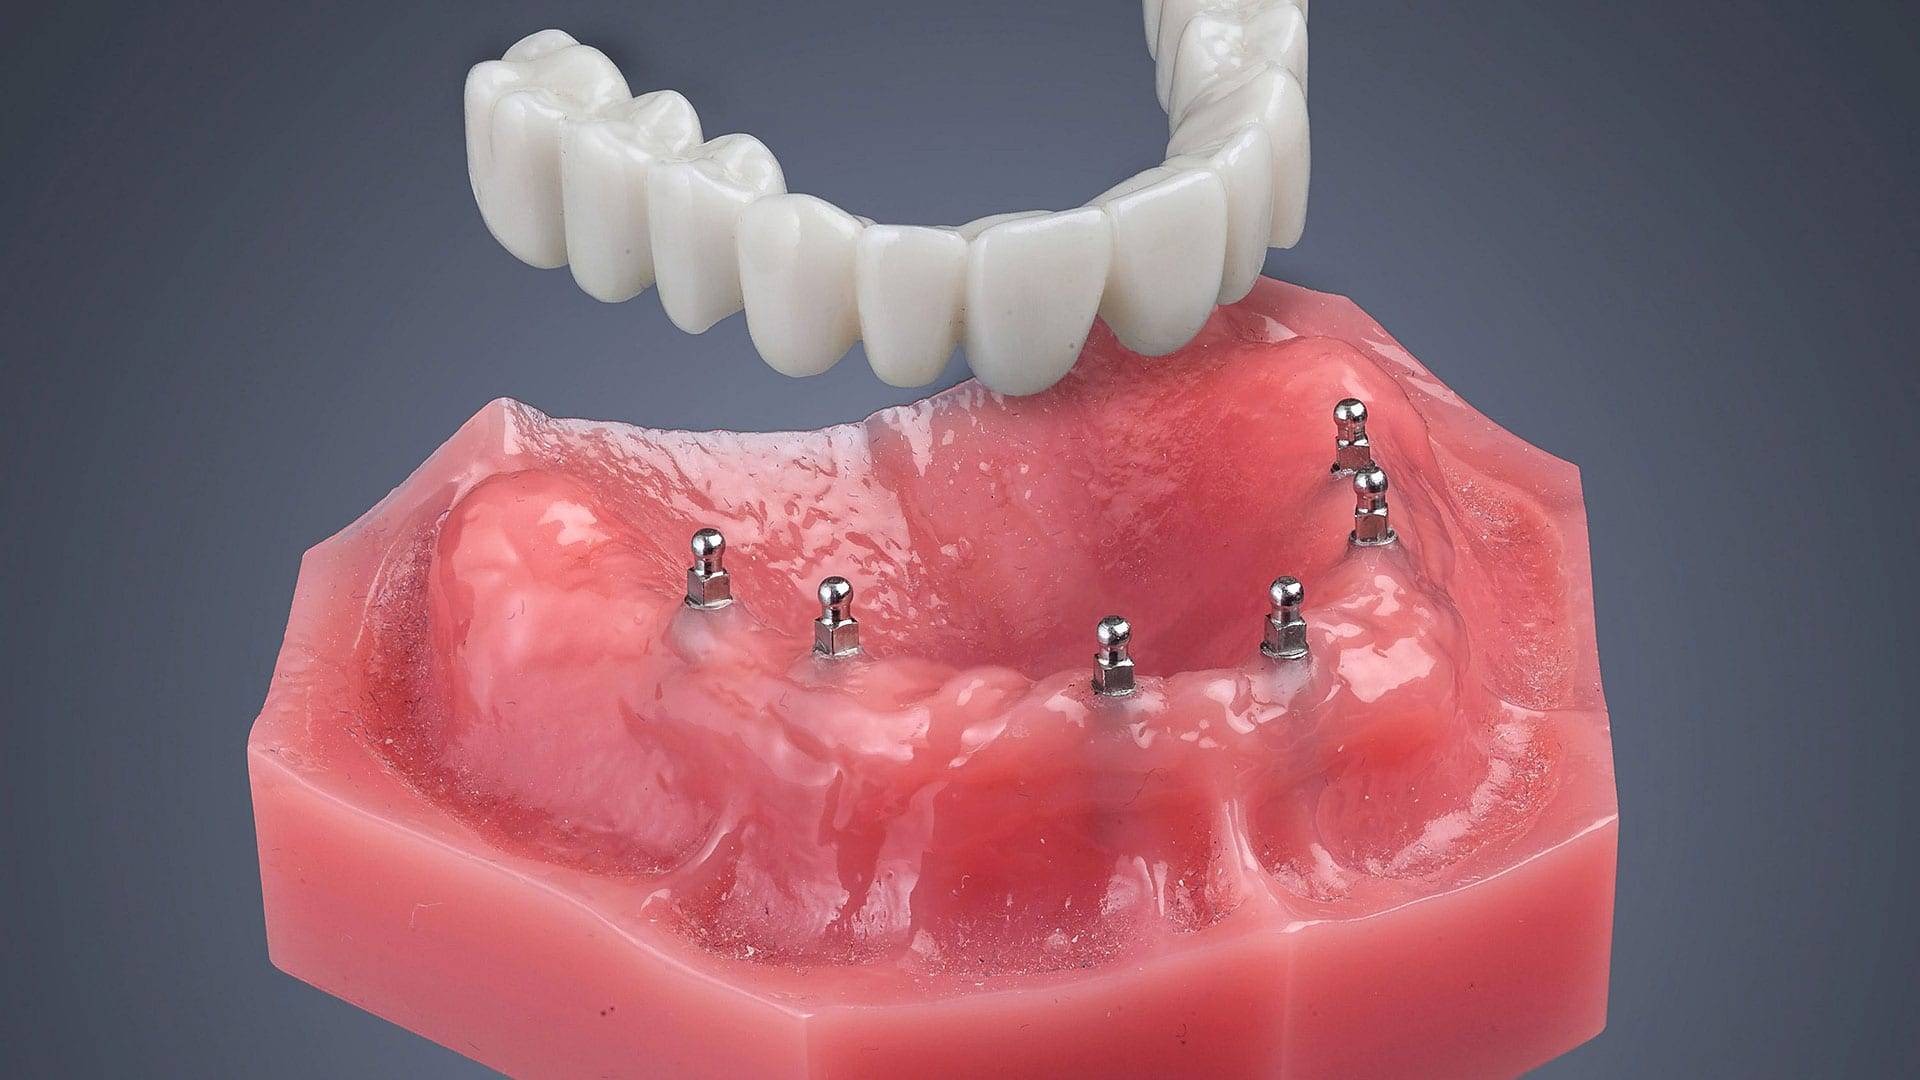 Mini Dental Implants Are Changing The Face Of Dentistry